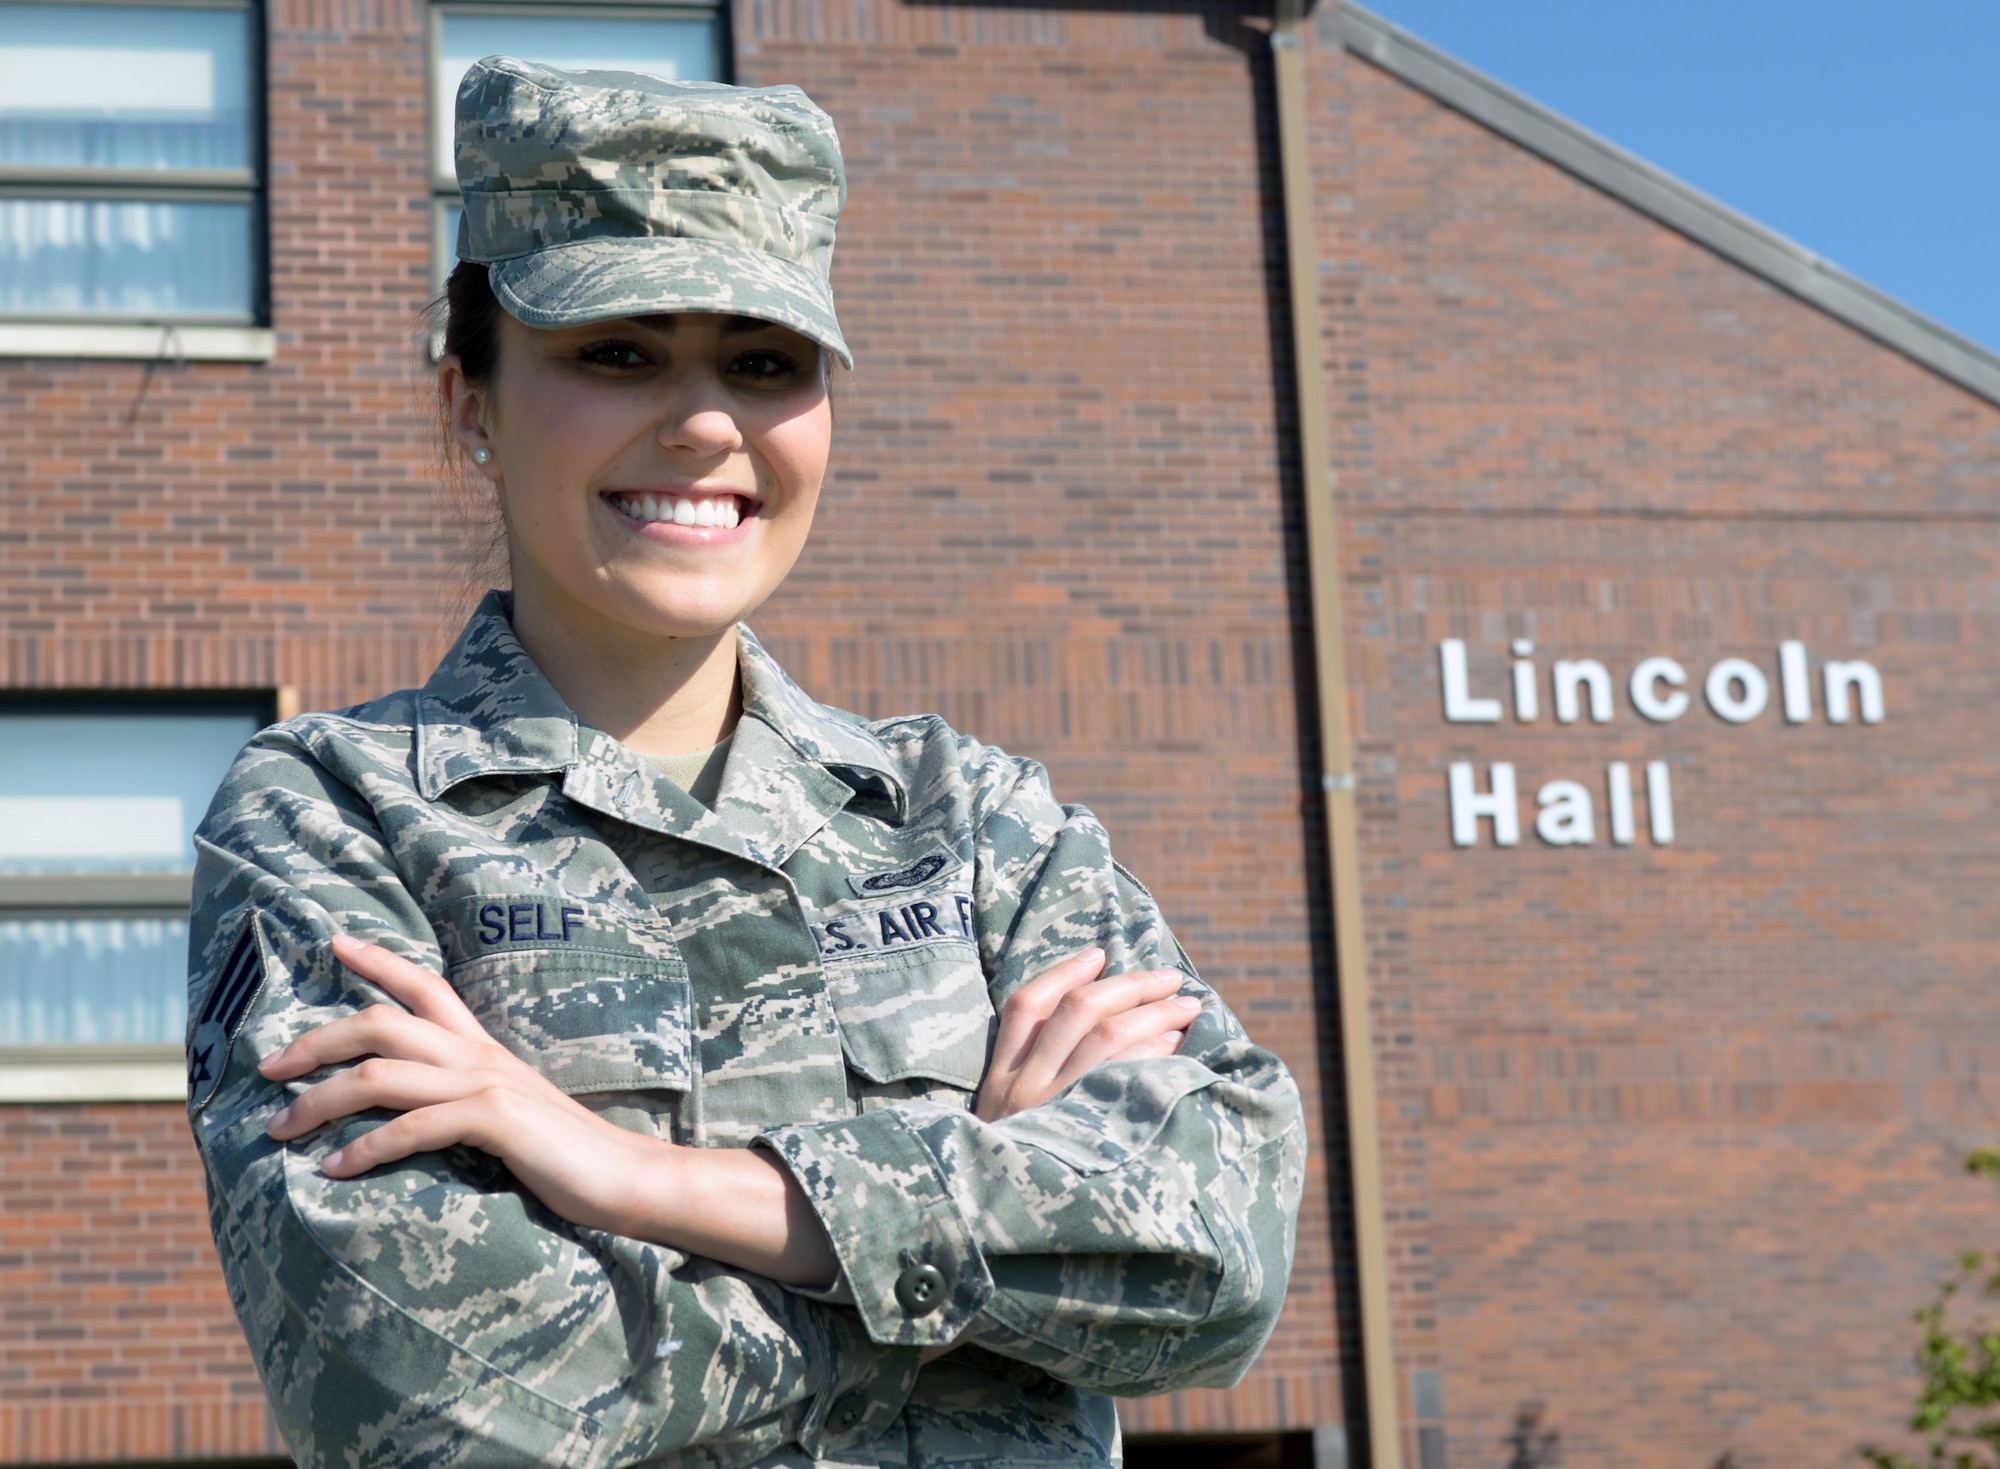 Senior Airman Arielle Self, 432nd Attack Squadron mission intelligence coordinator and Dorm Council president, stands in front of Lincoln Hall at Ellsworth Air Force Base, S.D., May 17, 2016. Self brought up the idea of the Prevention Dormitory Advocate team as a new way to provide Airmen residing in the dorms a way to seek help, acting as liaisons between Airmen and the Sexual Assault Response Coordinator. (U.S. Air Force photo by Airman Donald Knechtel/Released) 